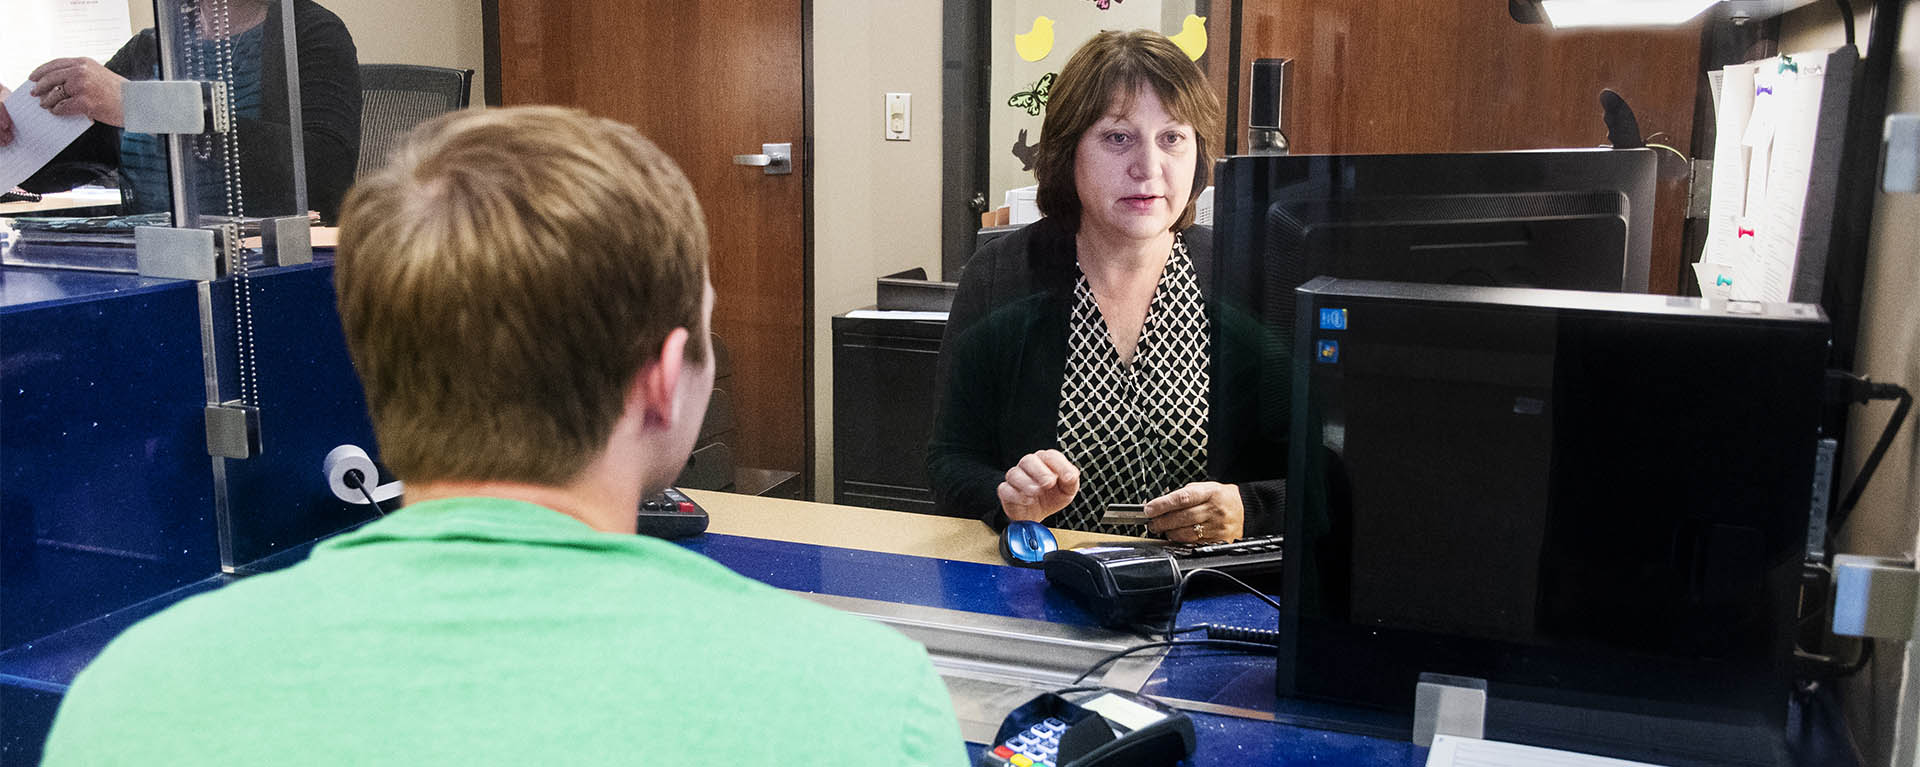 A Business Office employee helps a student in Morgan Hall.